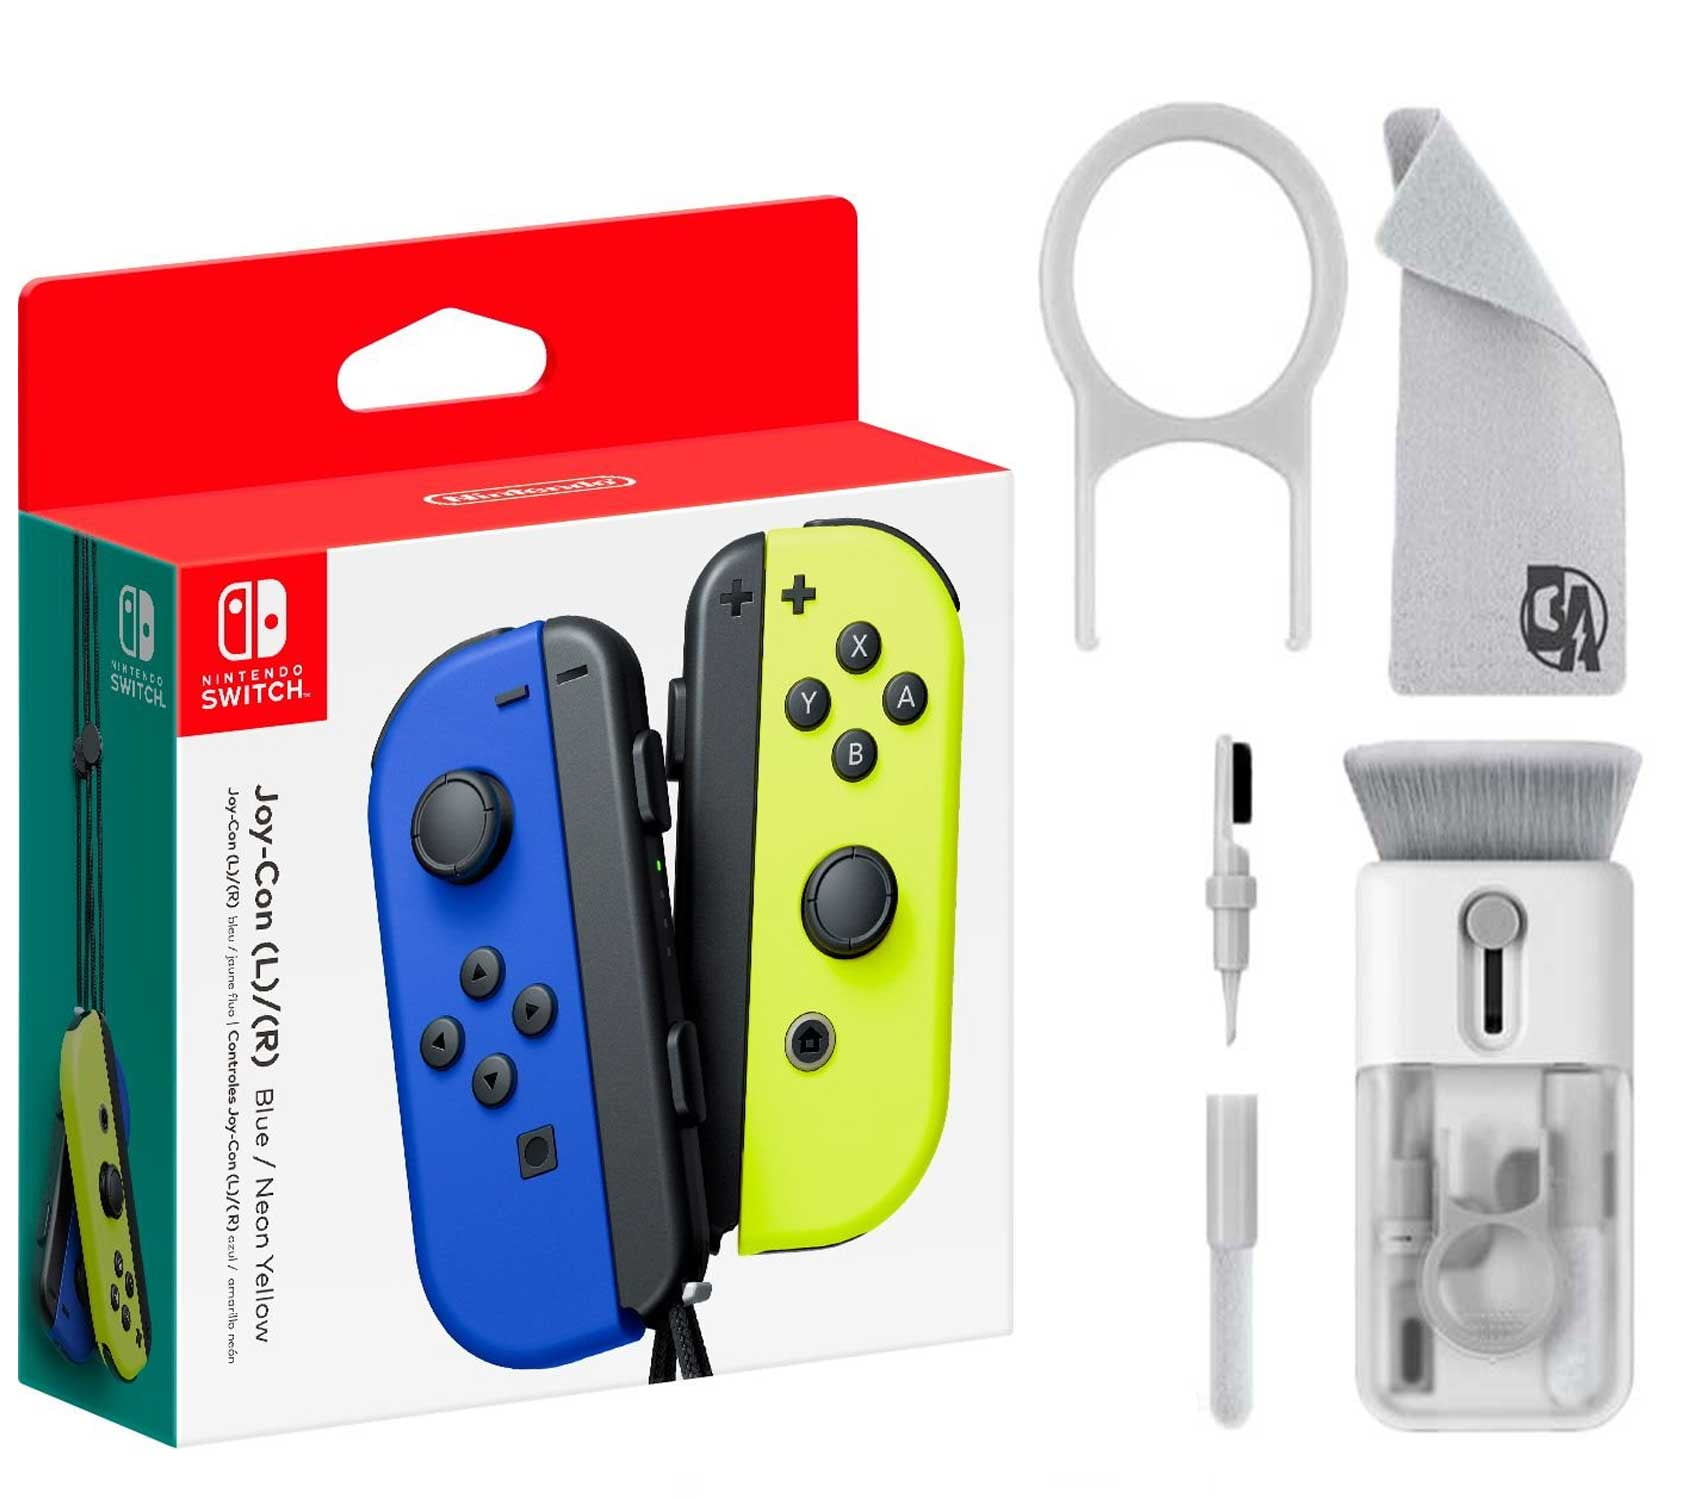 Joy-Con (L/R) Wireless Controllers for Nintendo Switch - Blue/Neon Yellow  With Cleaning Electric kit Bolt Axtion Bundle Like New 